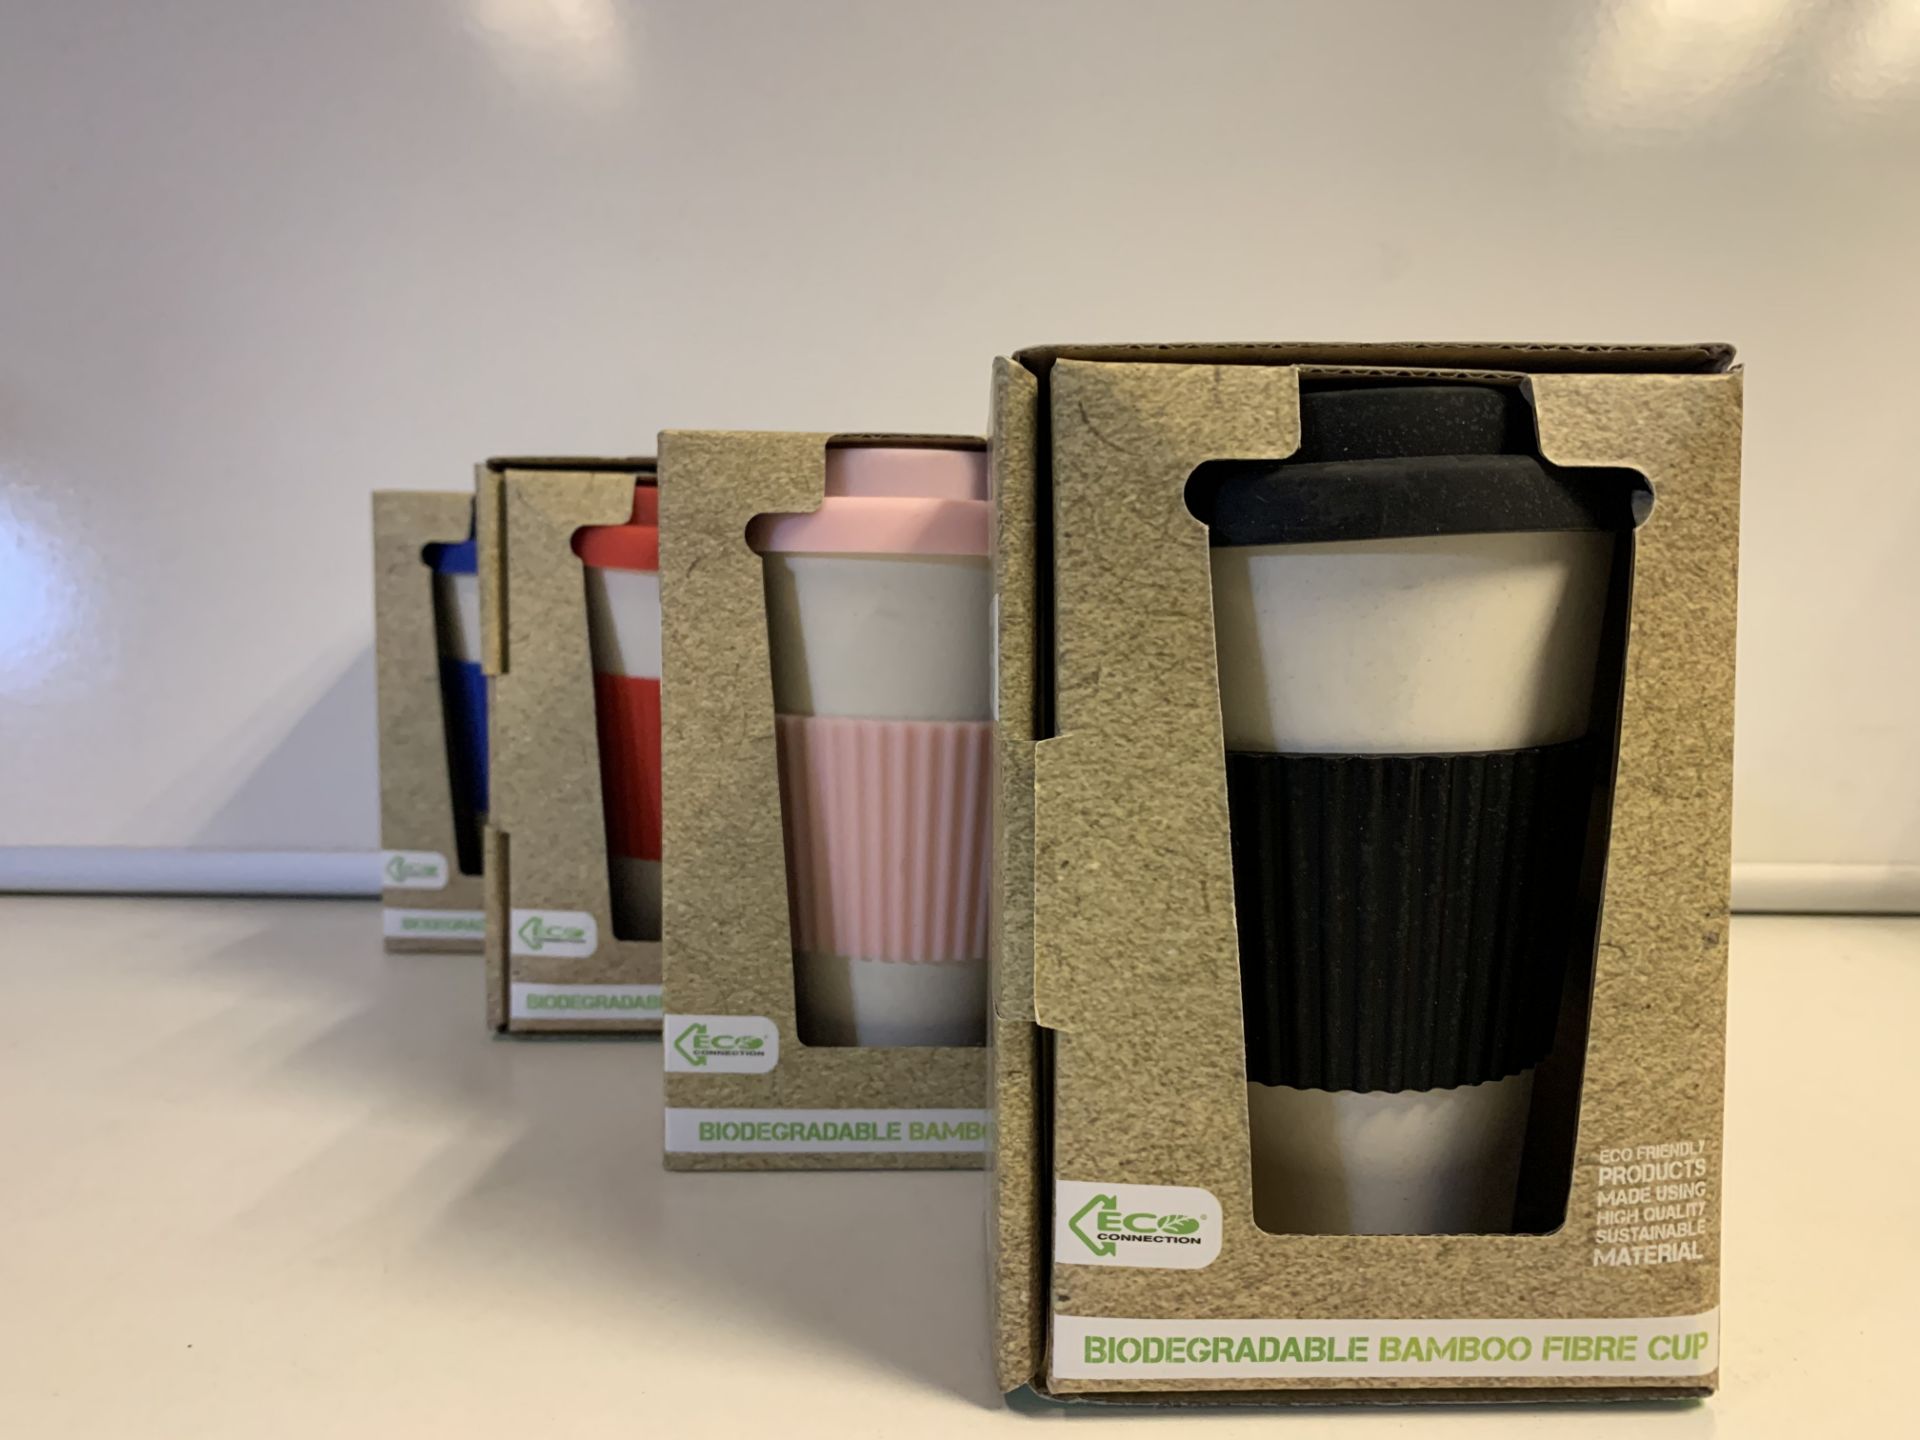 30 x NEW PACKAGED ECO CONNECTION BIODEGRADABLE BAMBOO FIBRE CUPS